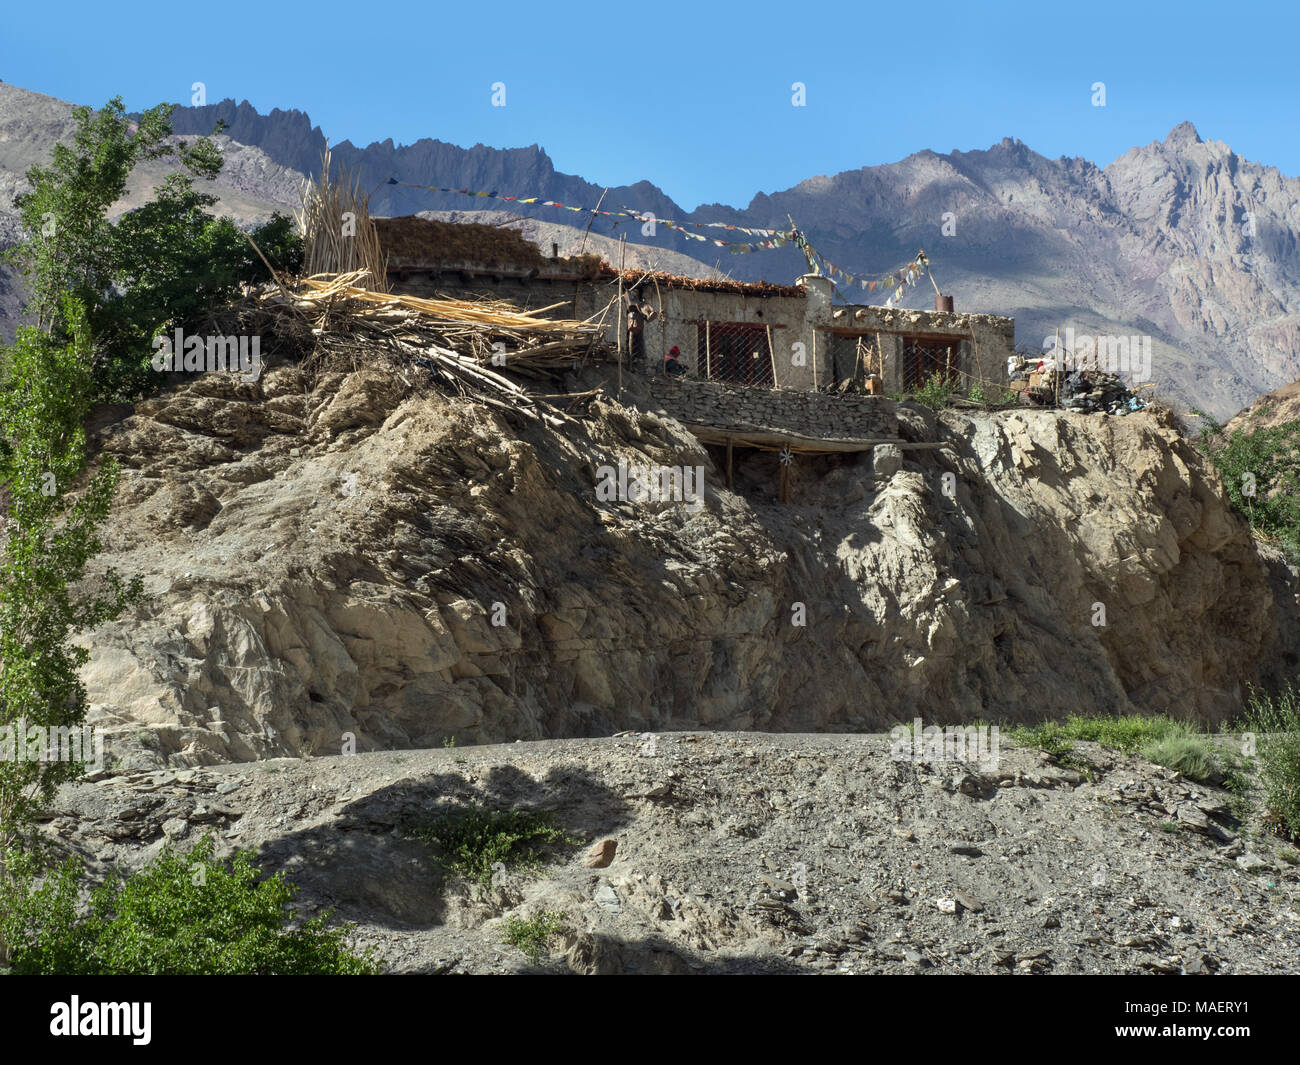 Traditional Tibetan House In A Mountain Village On The Rocks Among The Greenery Tibet Stock Photo Alamy